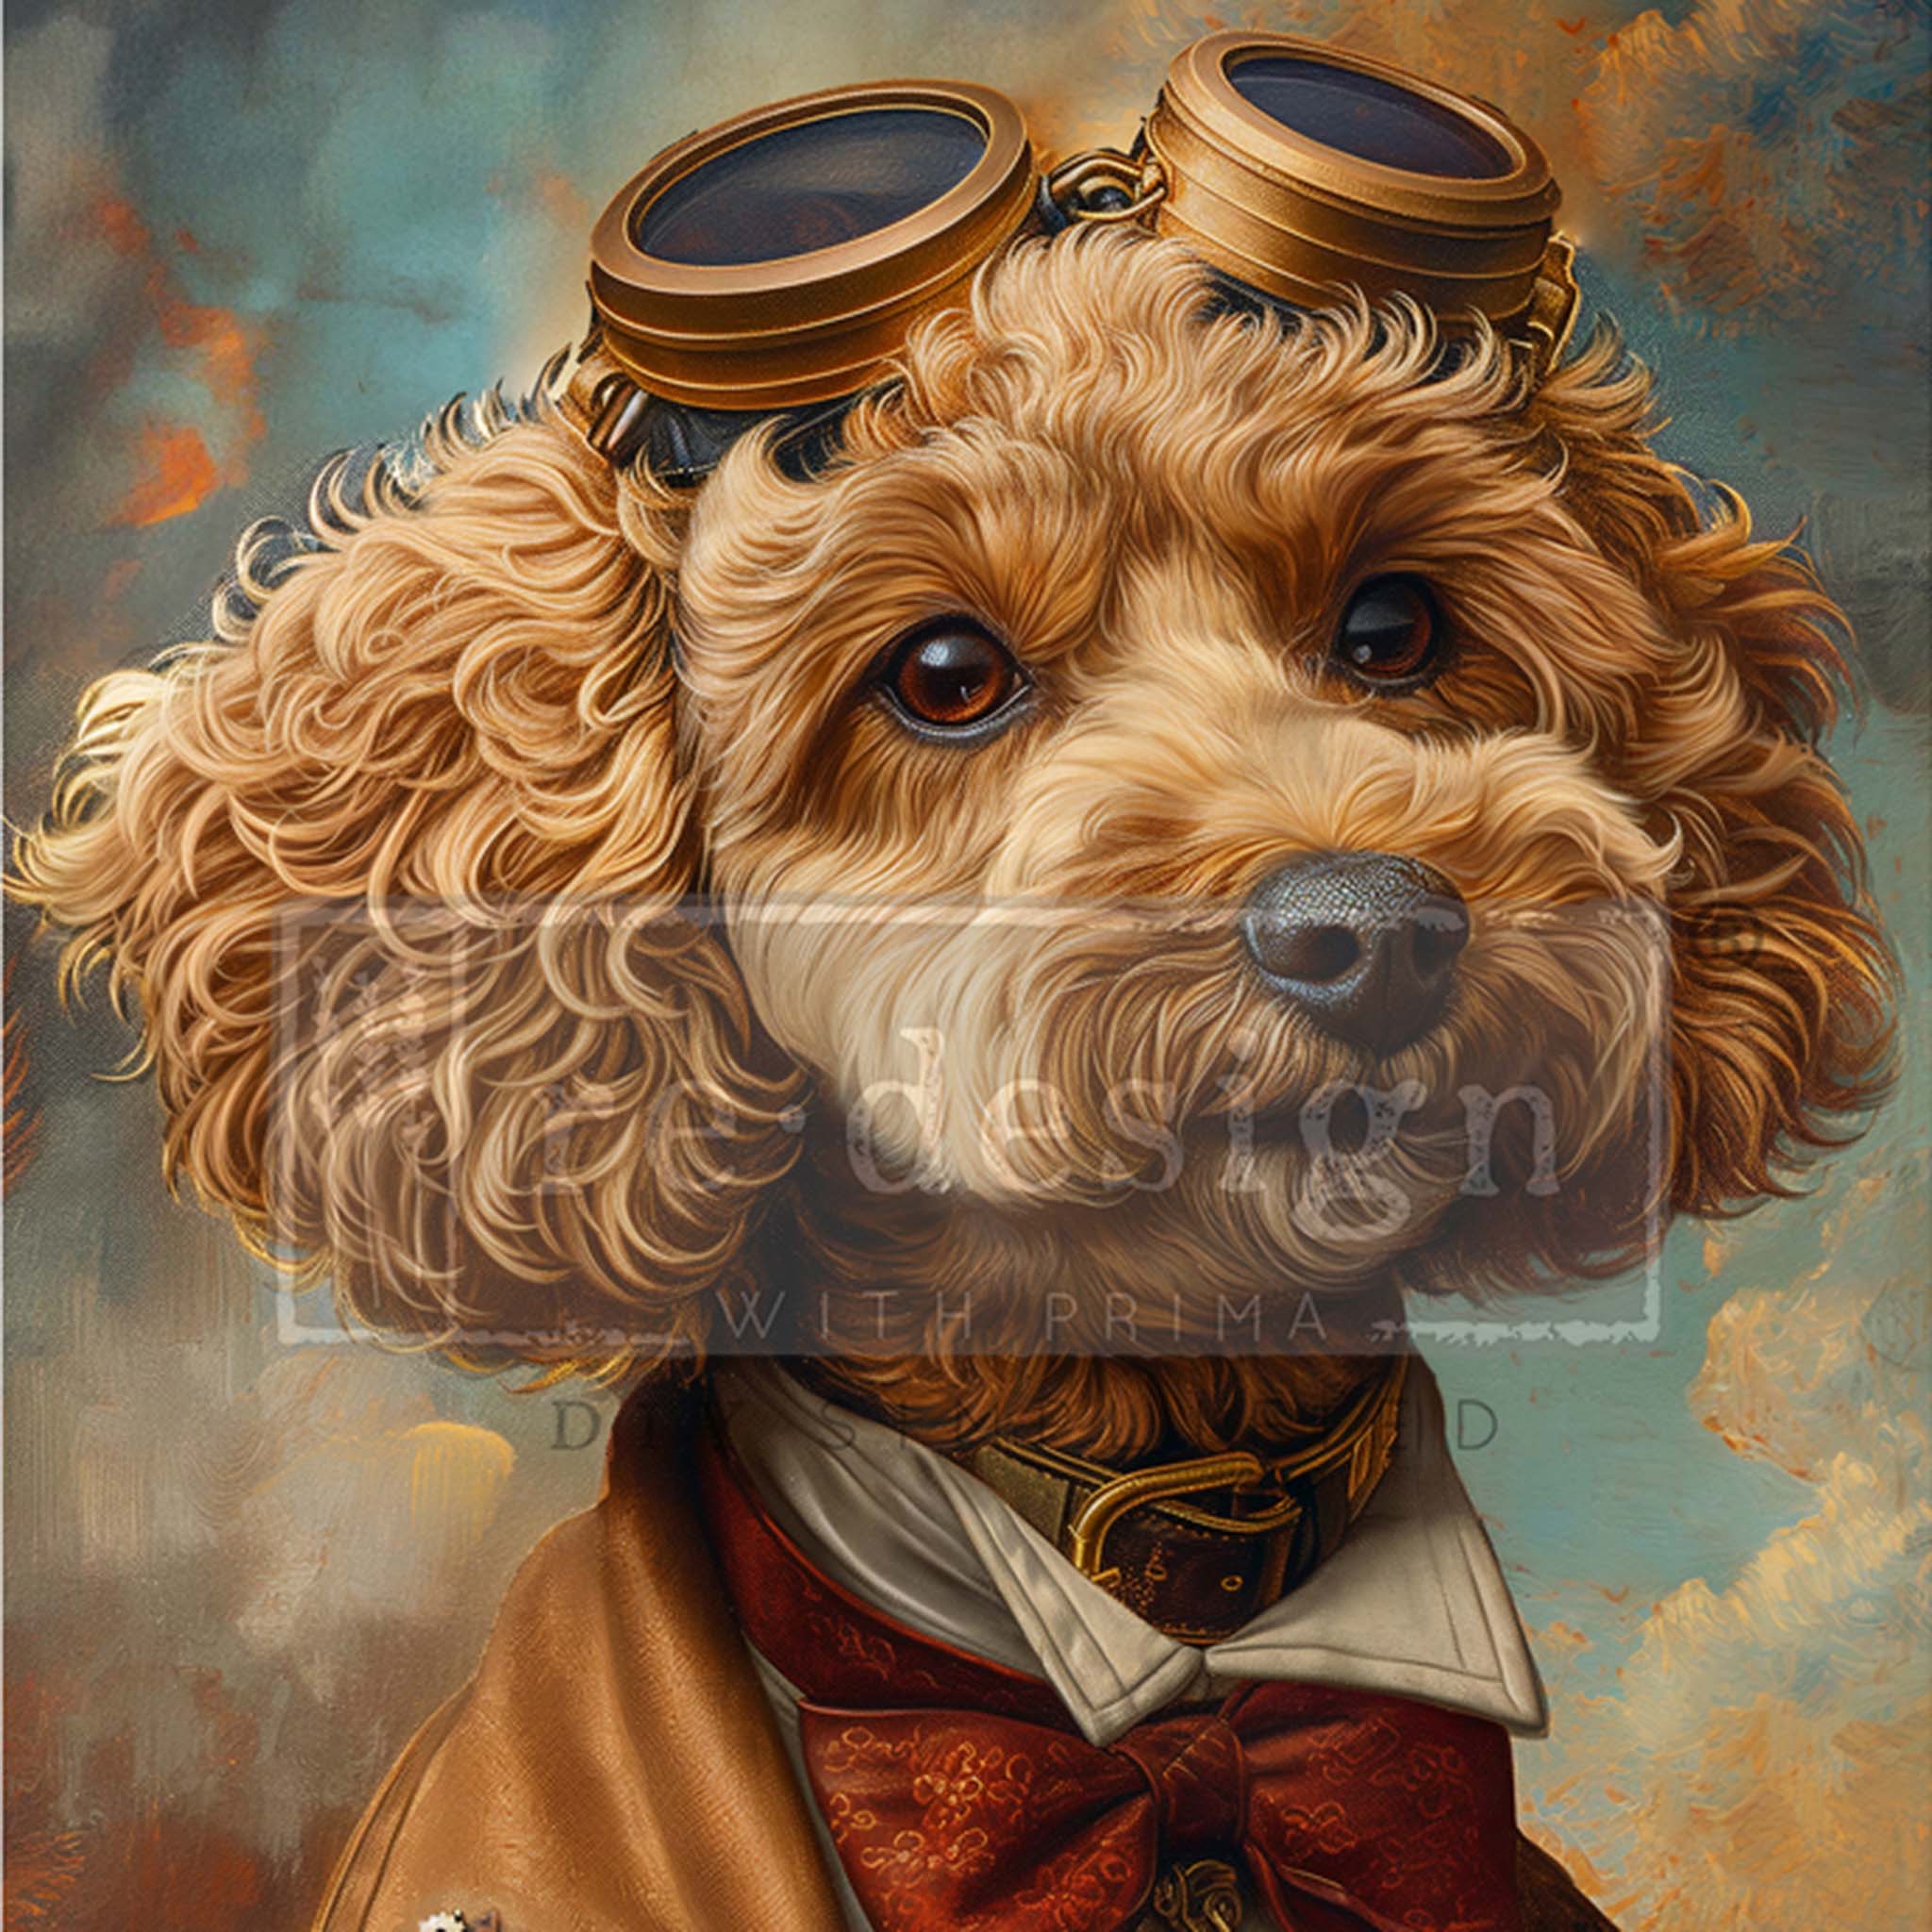 Close-up of an A1 fiber paper featuring a whimsical portrait of a dog against a cloudy sky backdrop and is wearing a Steampunk style flight suit with pilot goggles on its head.